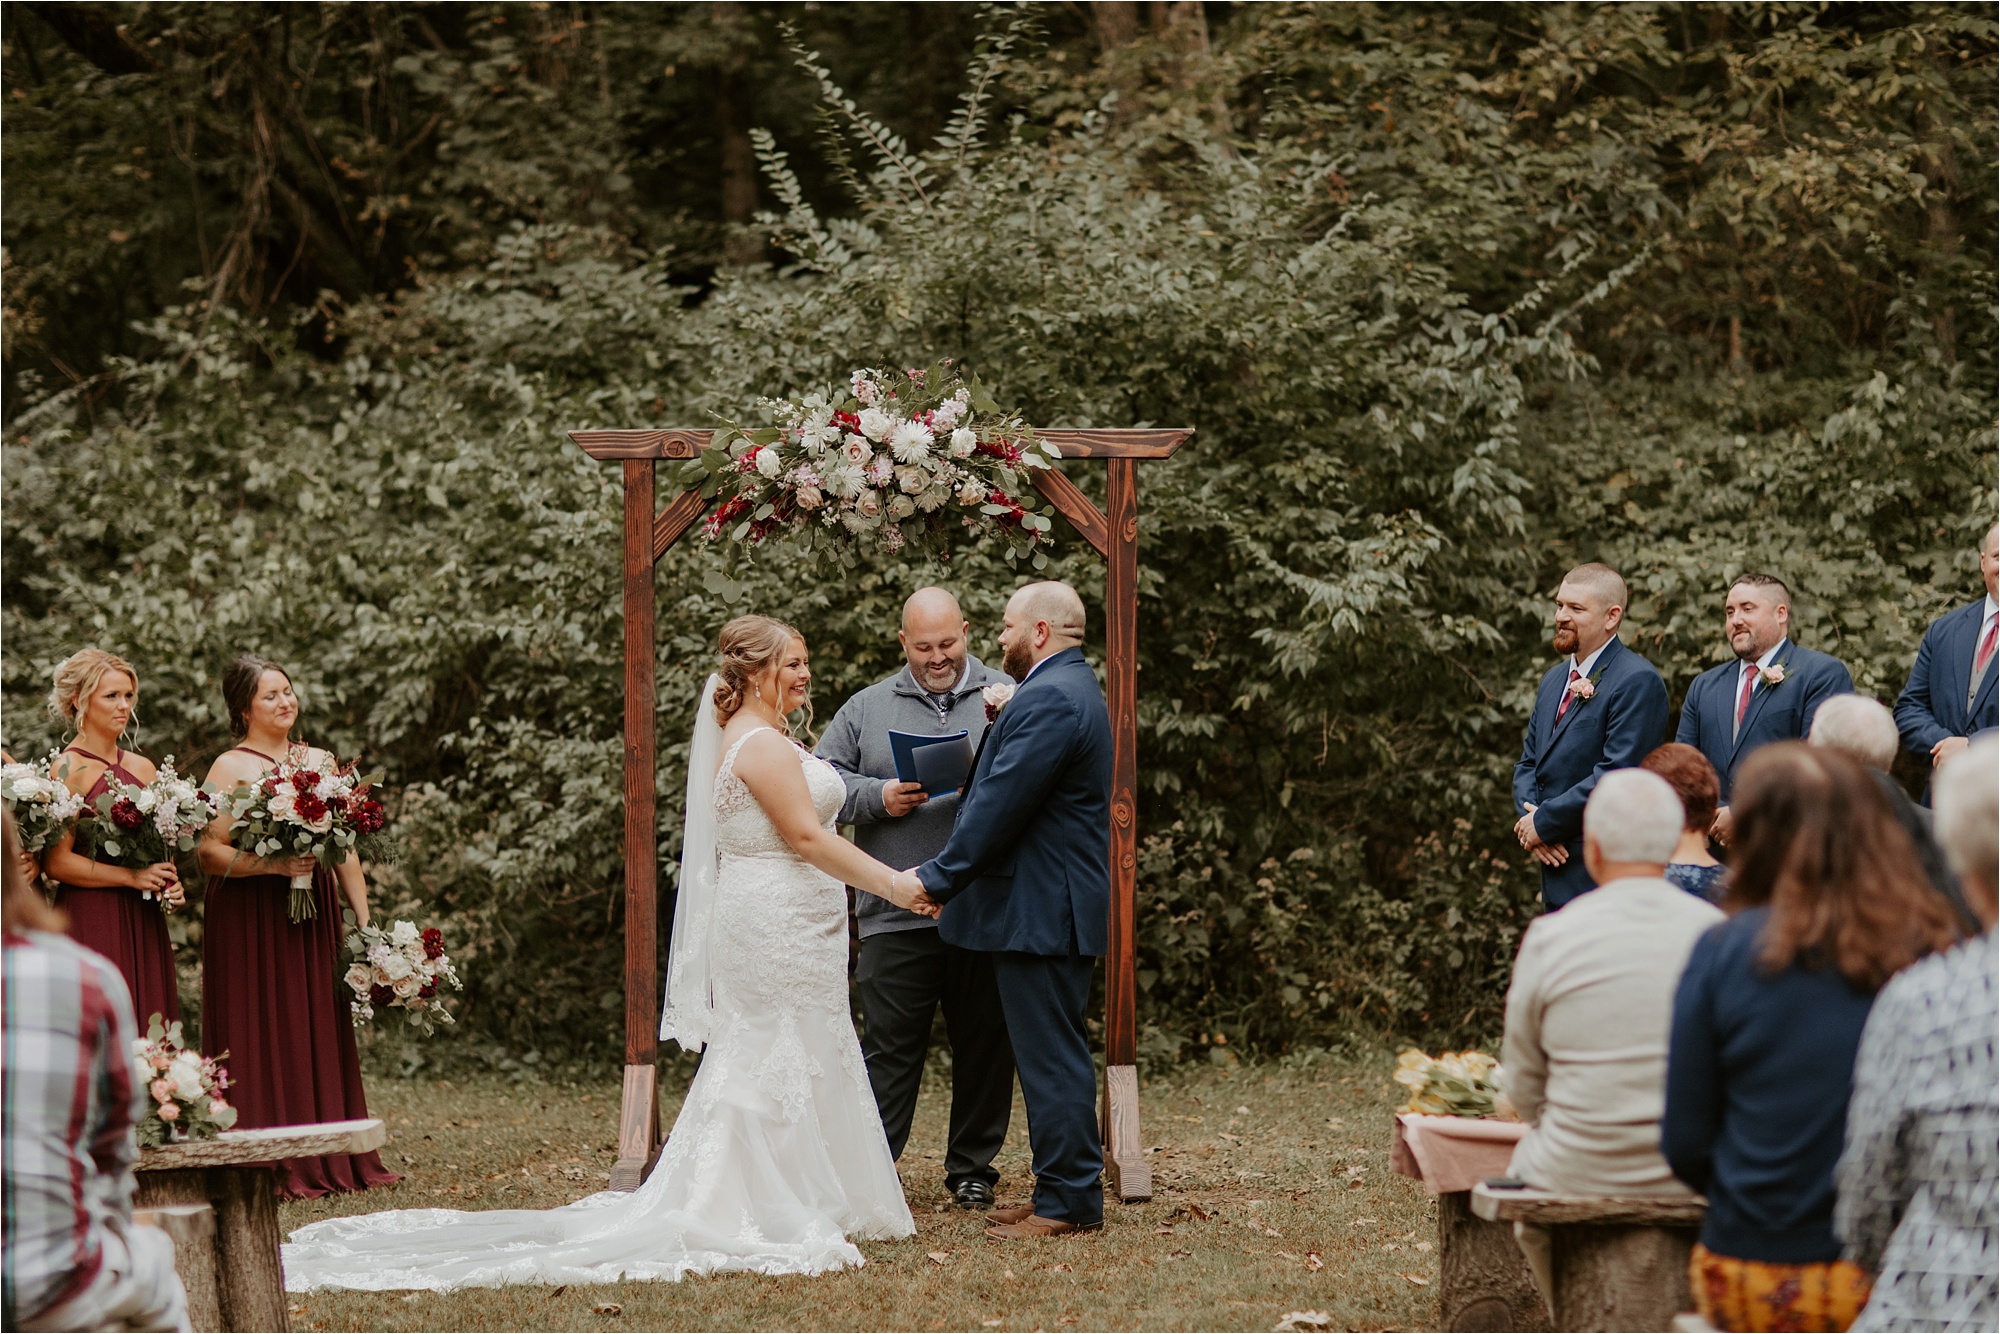 Outdoor Fall Wedding Day at Mount Langham in Kankakee, IL. Chicago Wedding Photographer